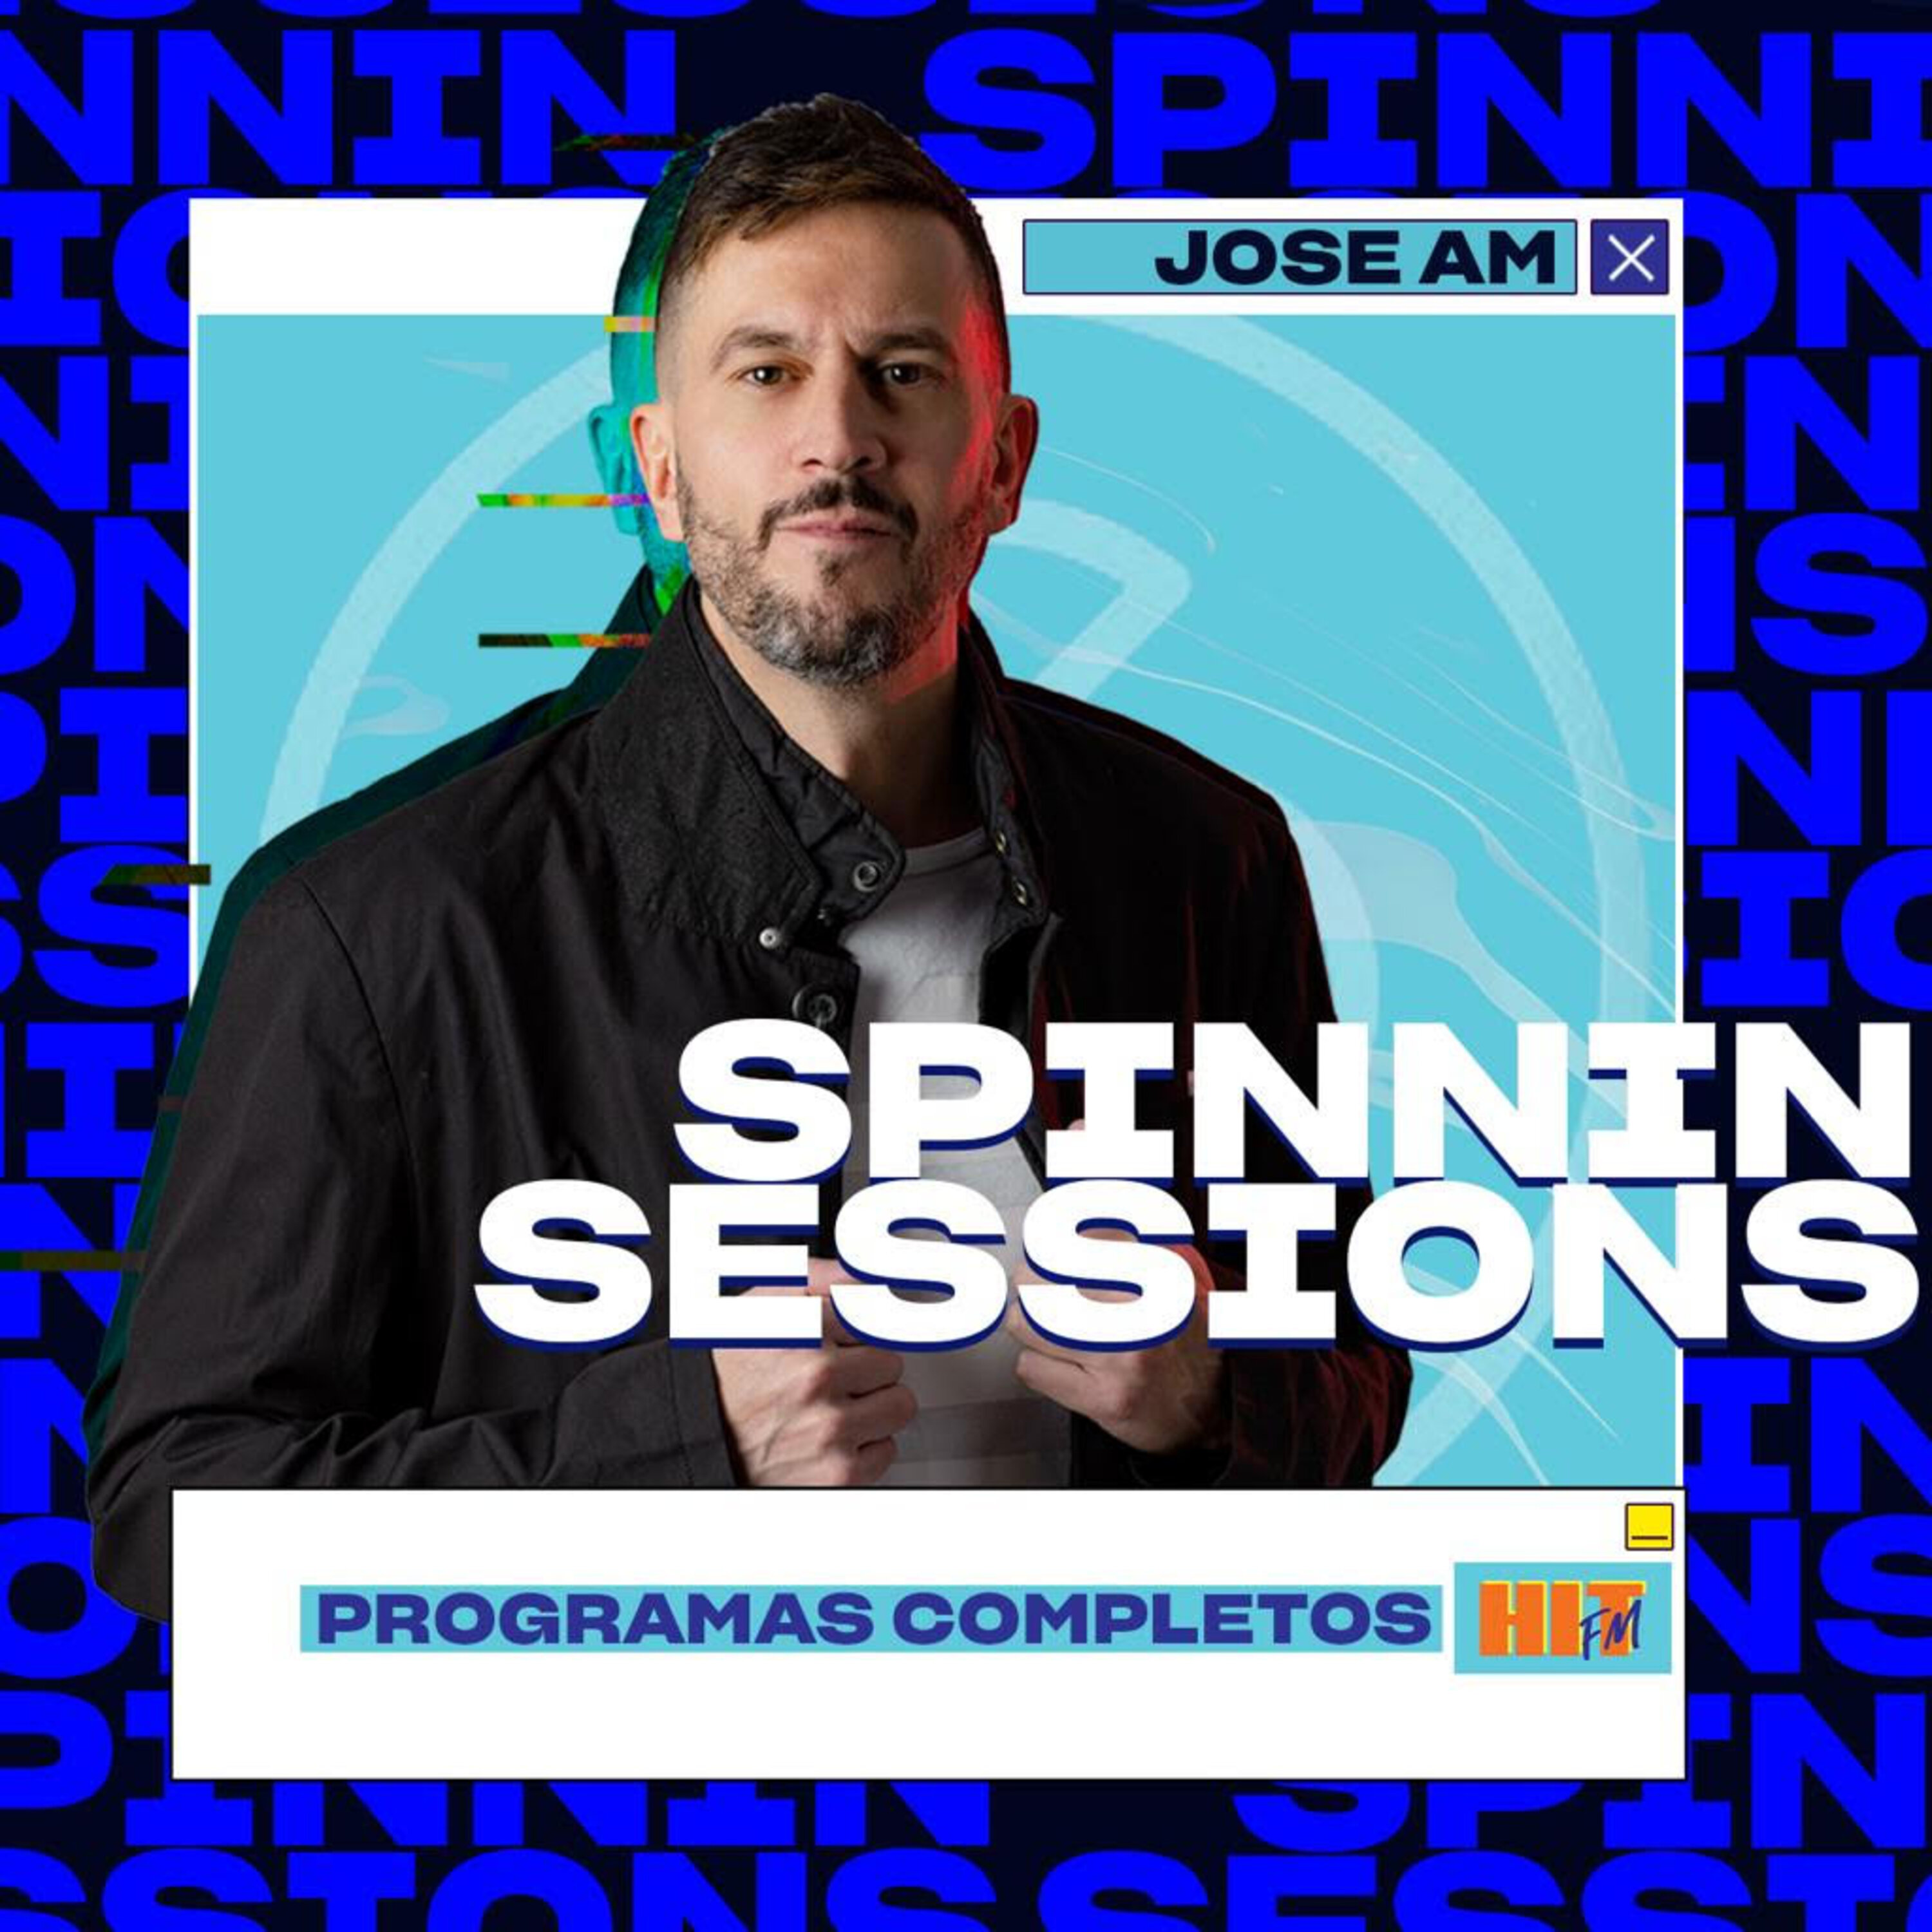 Spinnin Sessions con Jose Am (01/05/2022)